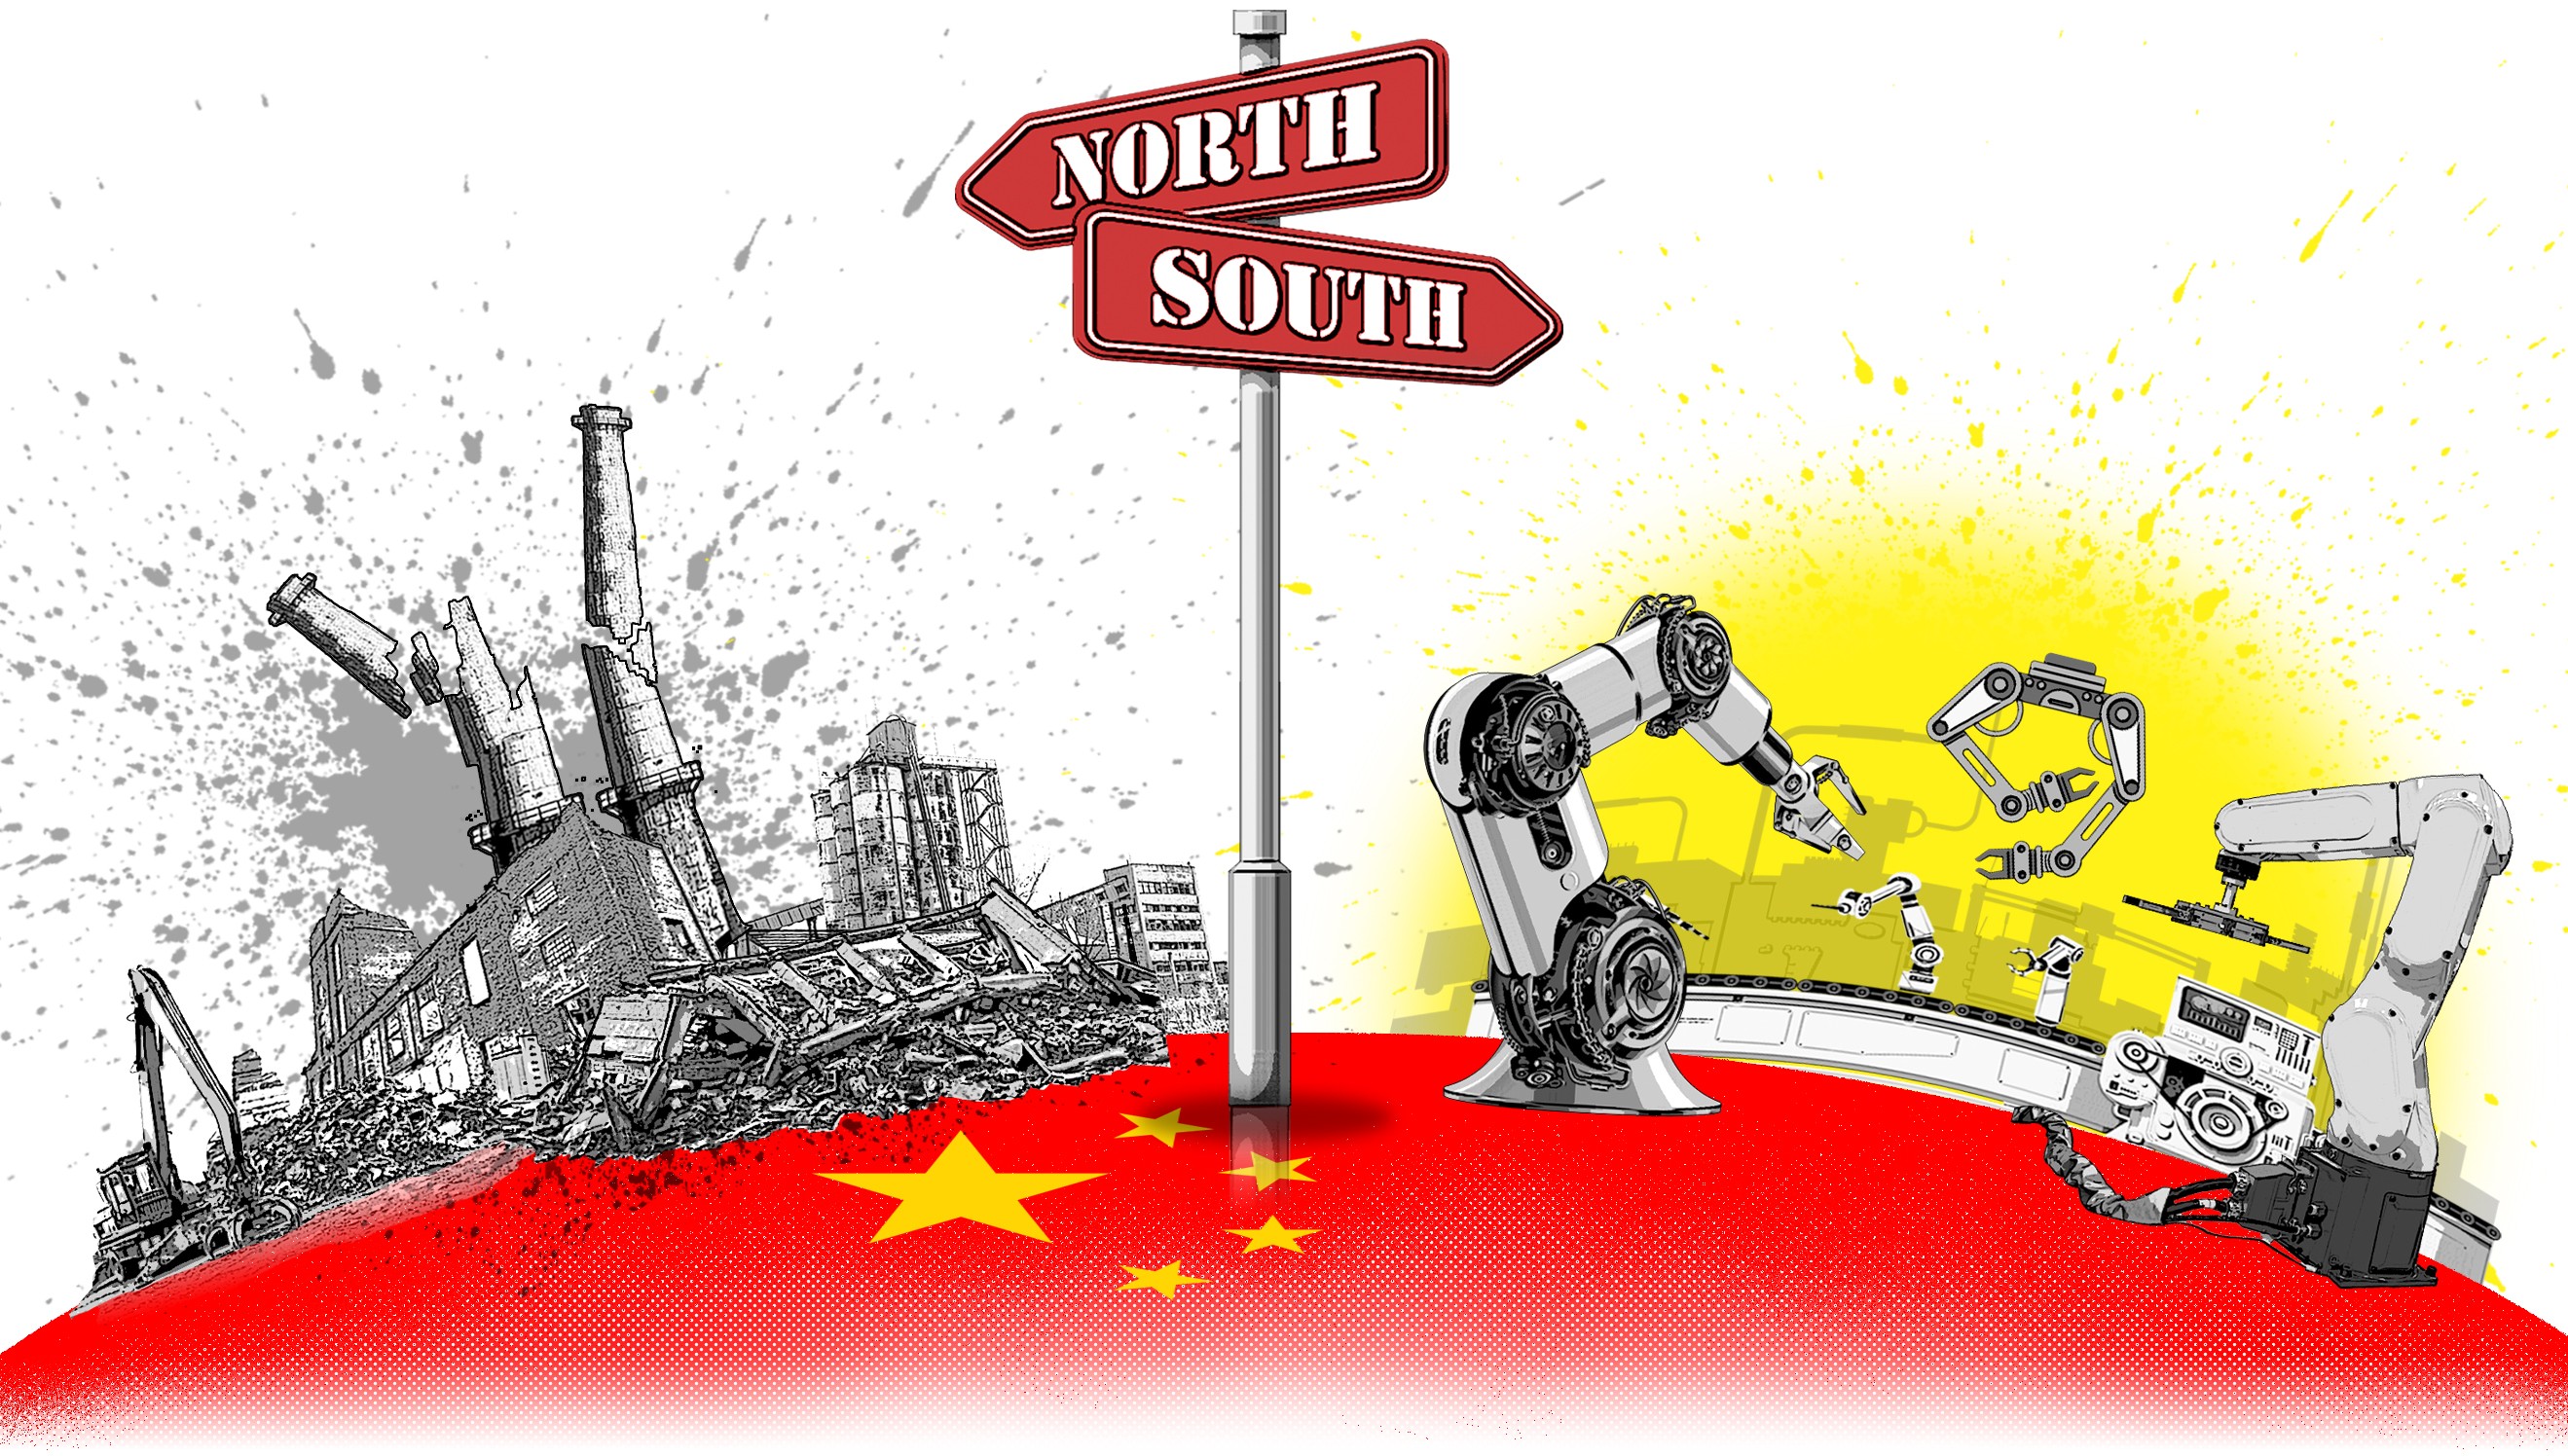 China’s northeast rust belt, once the pride and birthplace of China’s industrial development, is in its biggest economic slump. Illustration: Henry Wong